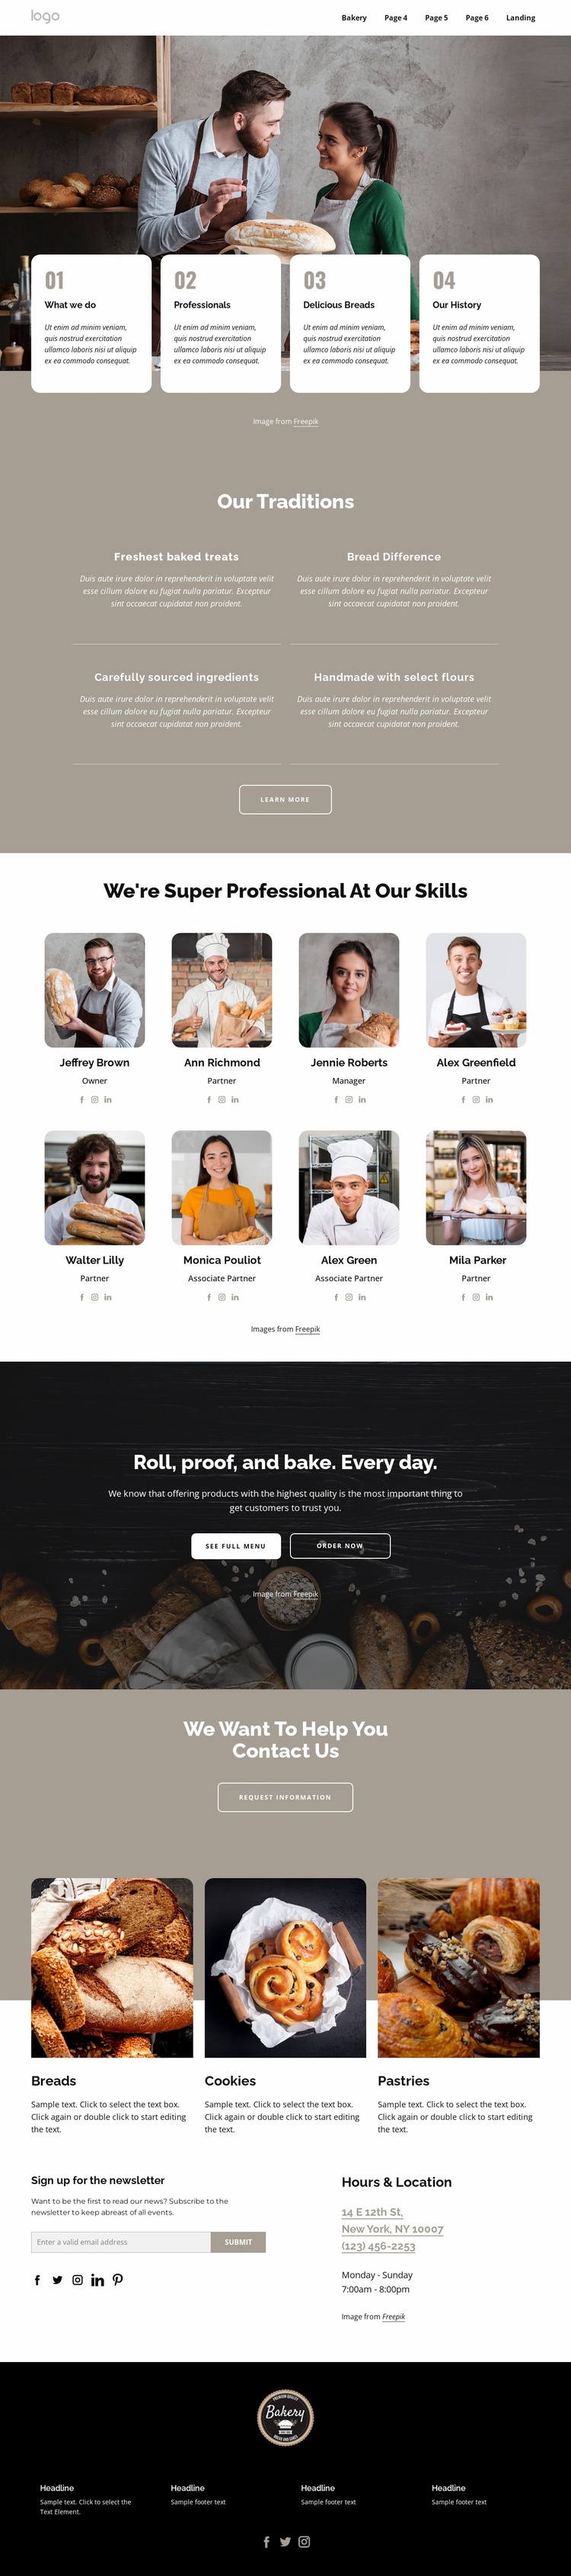 We are professional bakers Ecommerce Website Design